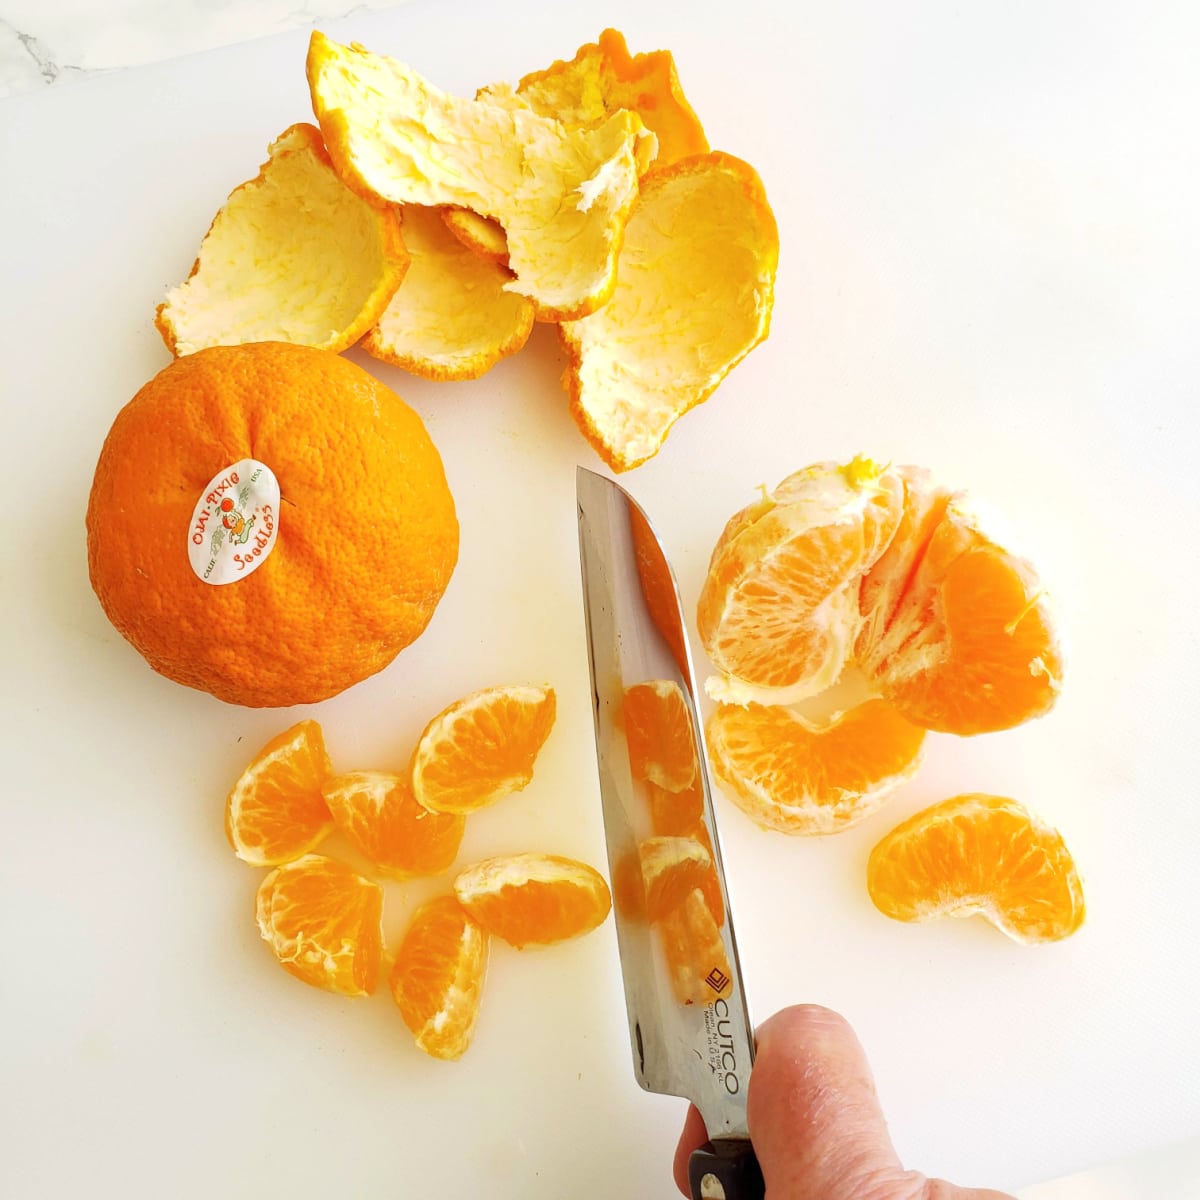 Peel, segment and cut the tangerines on a white cutting board